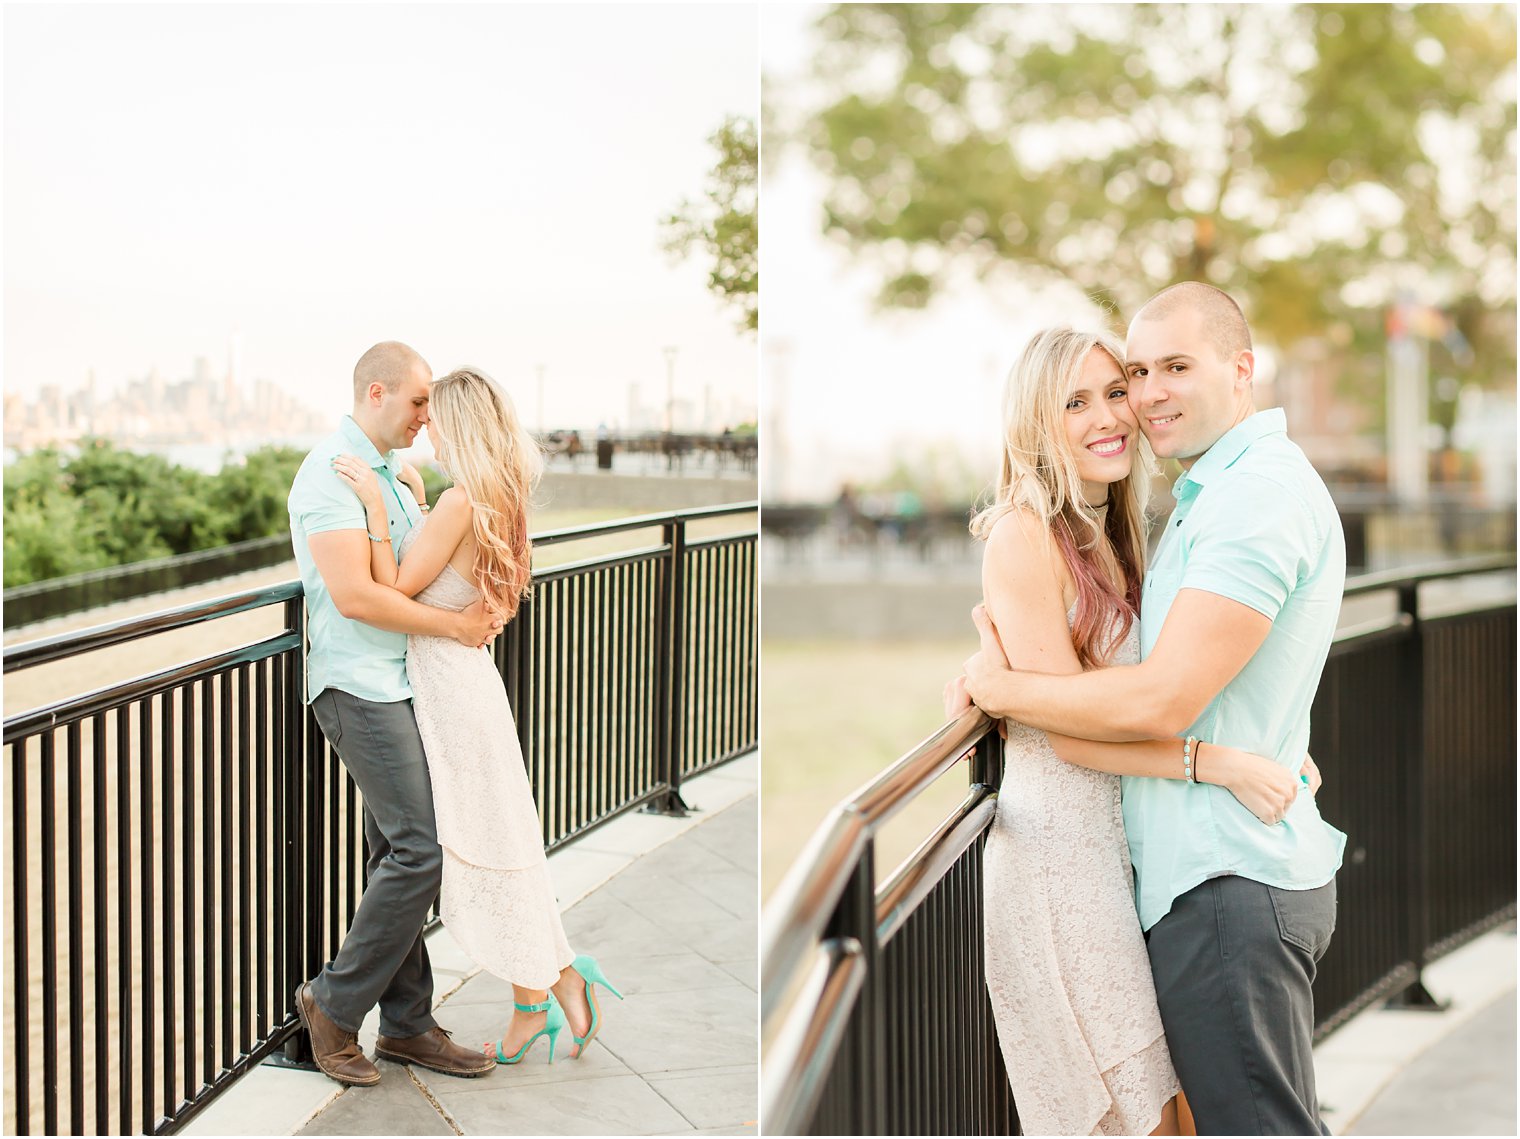 Romantic engagement photos with NYC in background